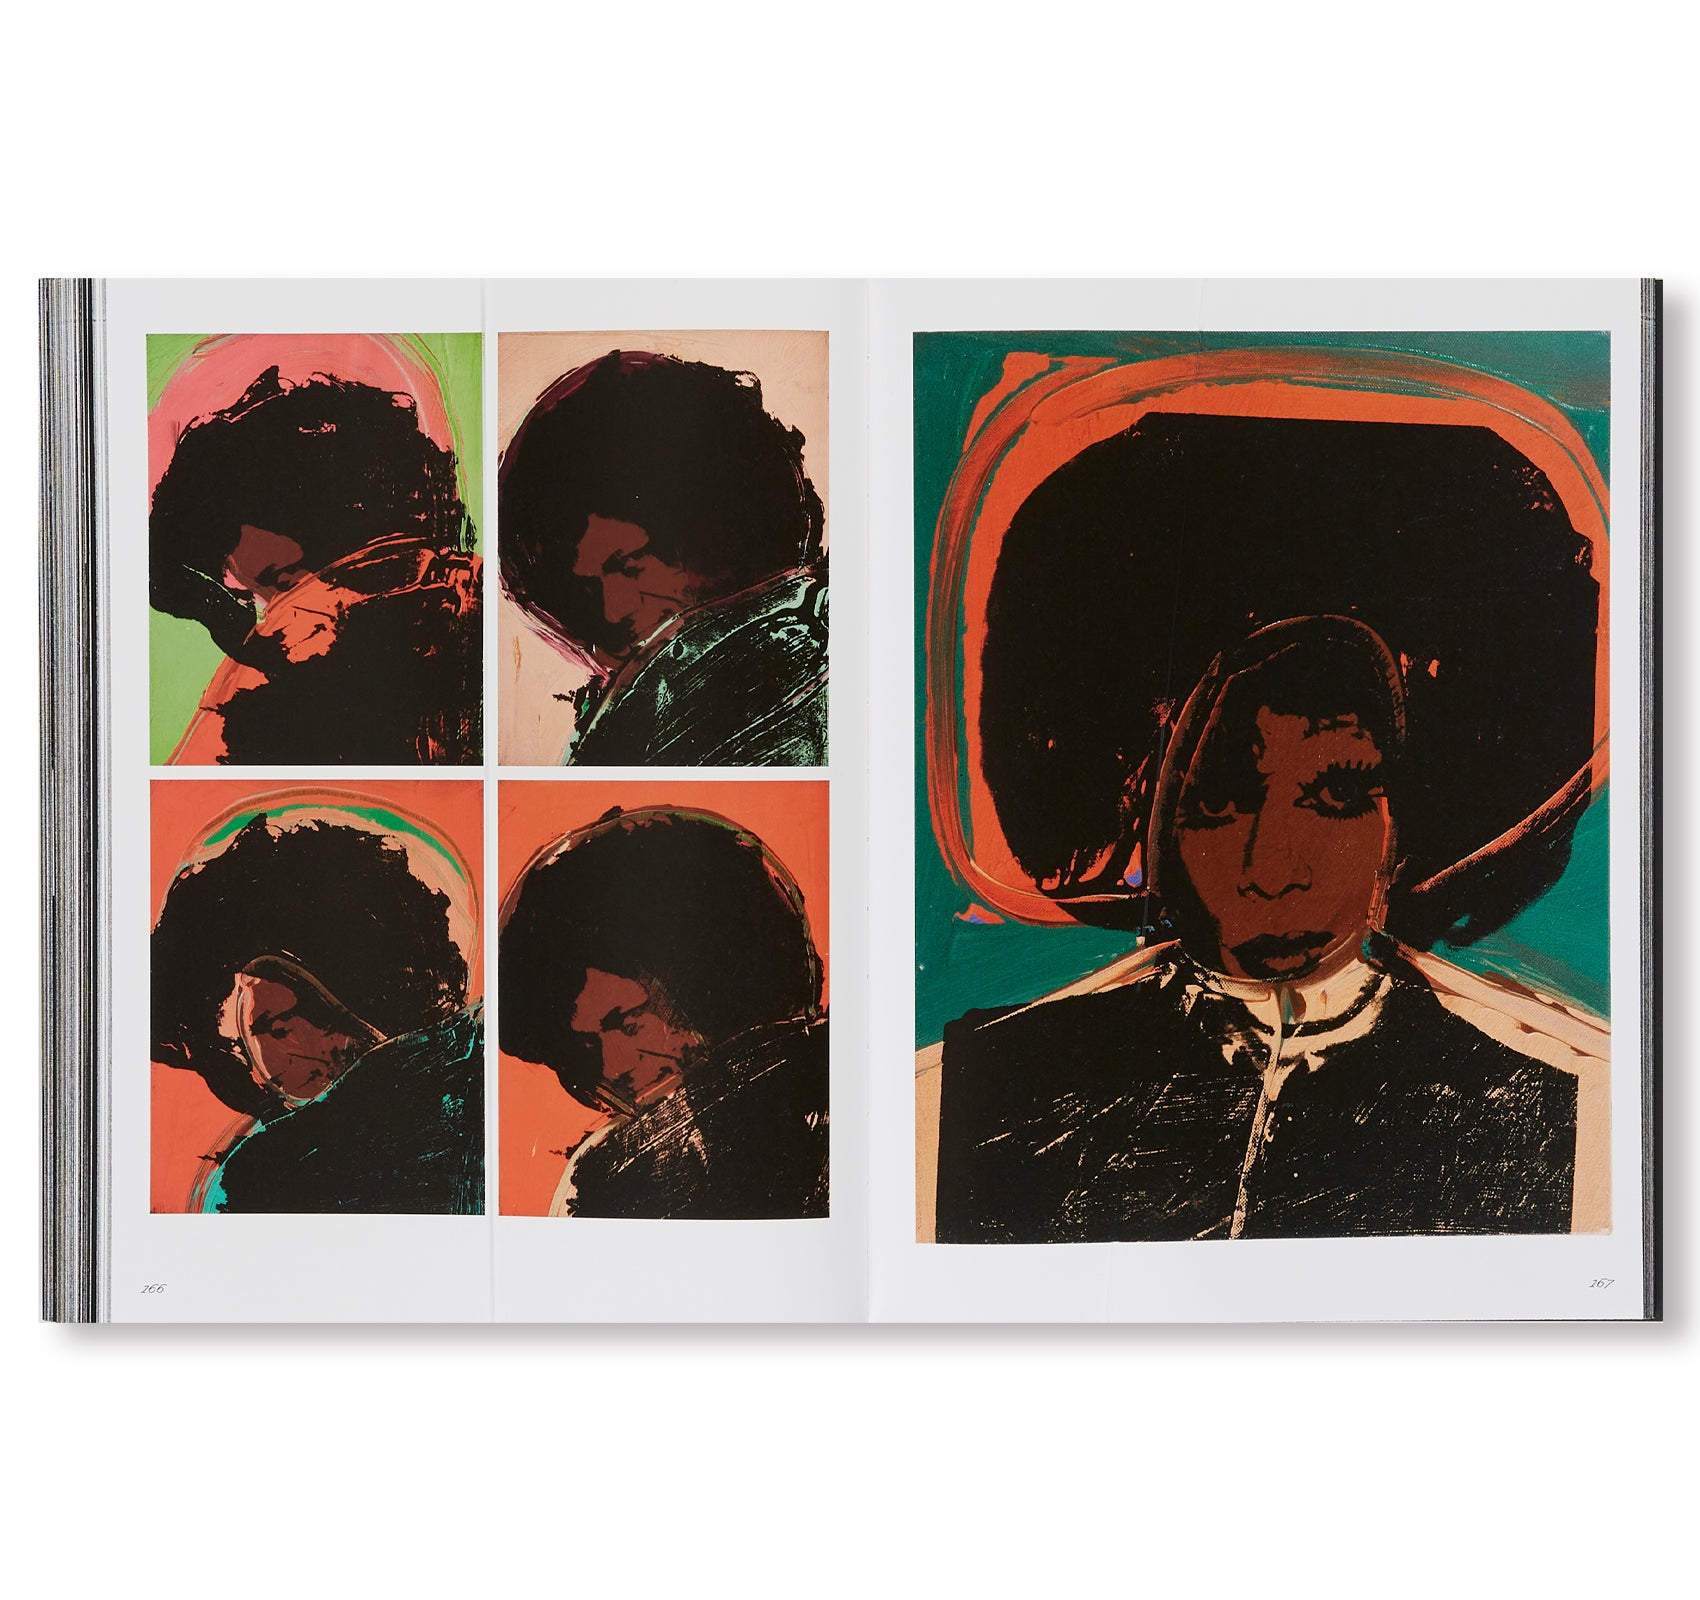 ANDY WARHOL by Andy Warhol [SOFTCOVER]